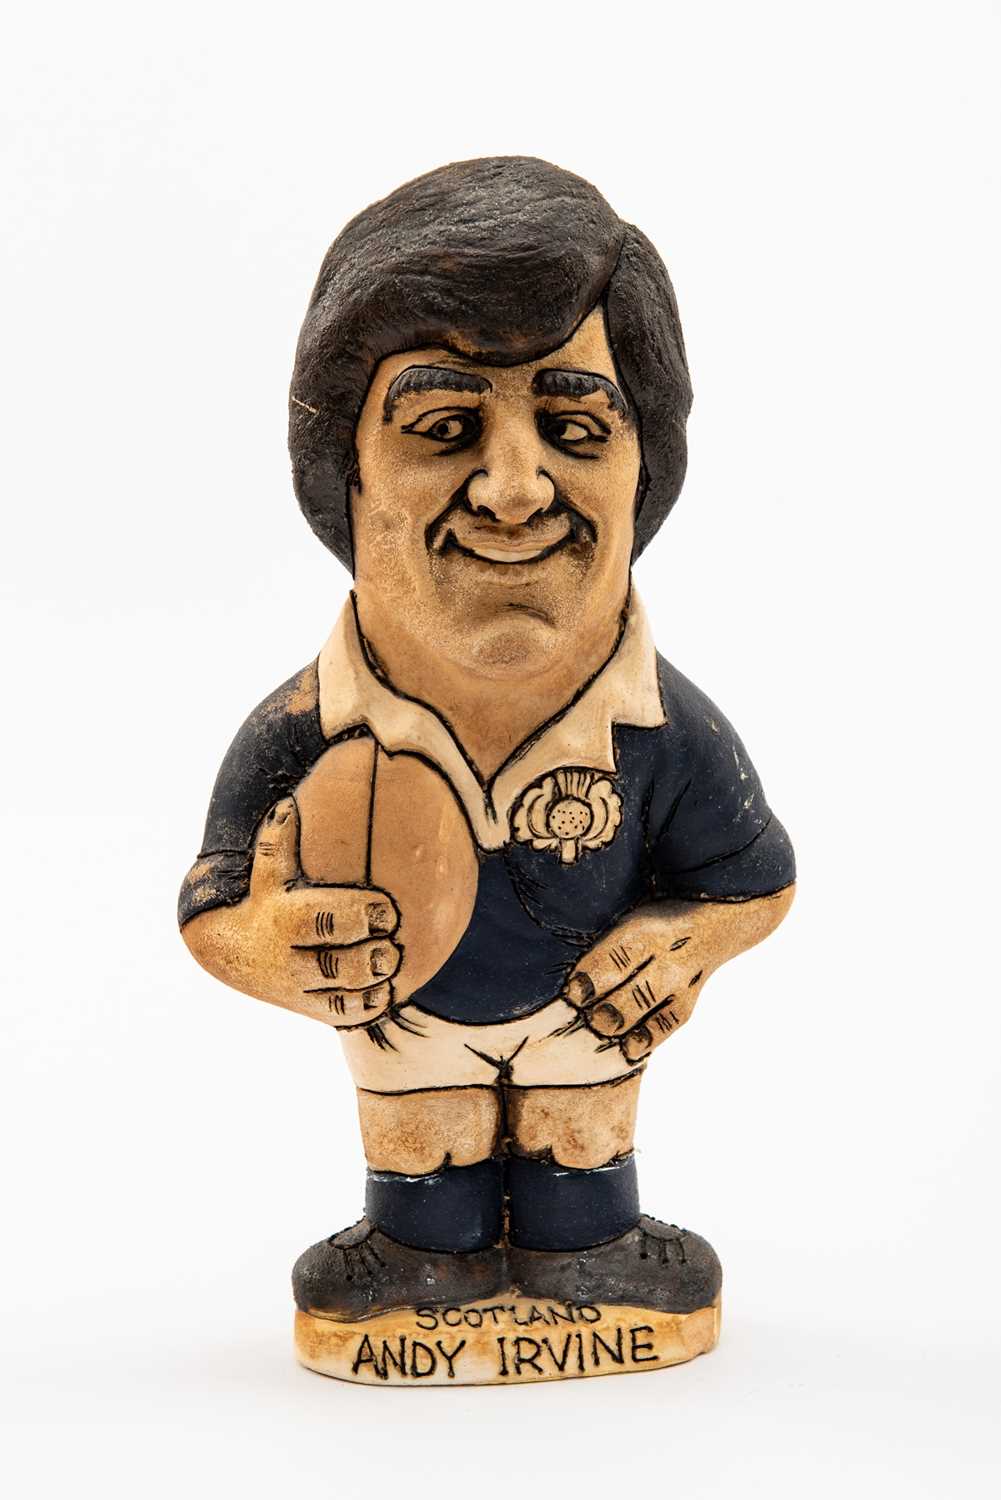 GROGG CARICATURE BY JOHN HUGHES OF ANDY IRVINE standing on titled base, wearing his Scotland No.15